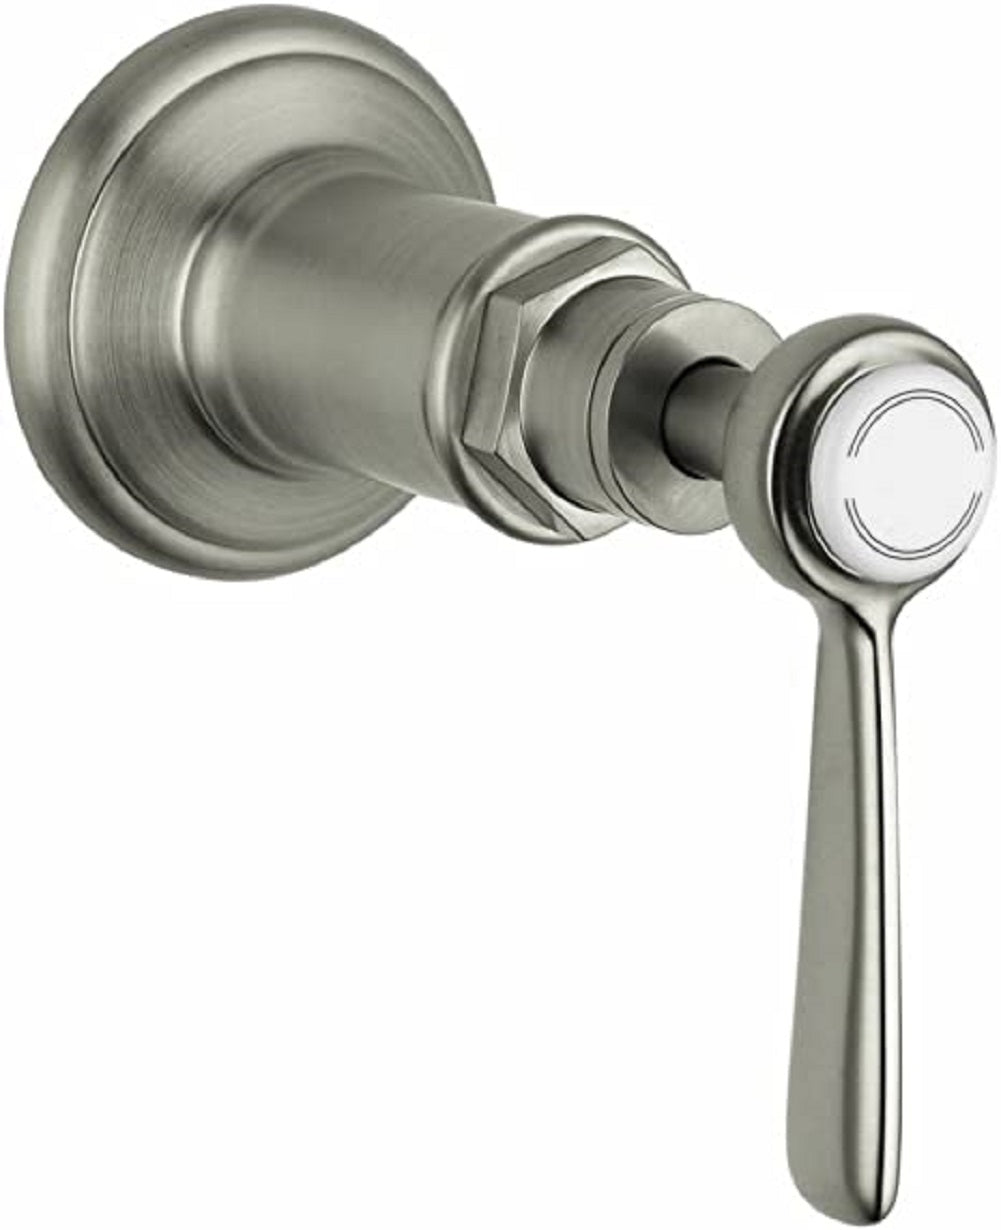 AXOR Montreux Classic 1-Handle 2-inch Wide Volume Control Valve Trim Only in Brushed Nickel, 16872821